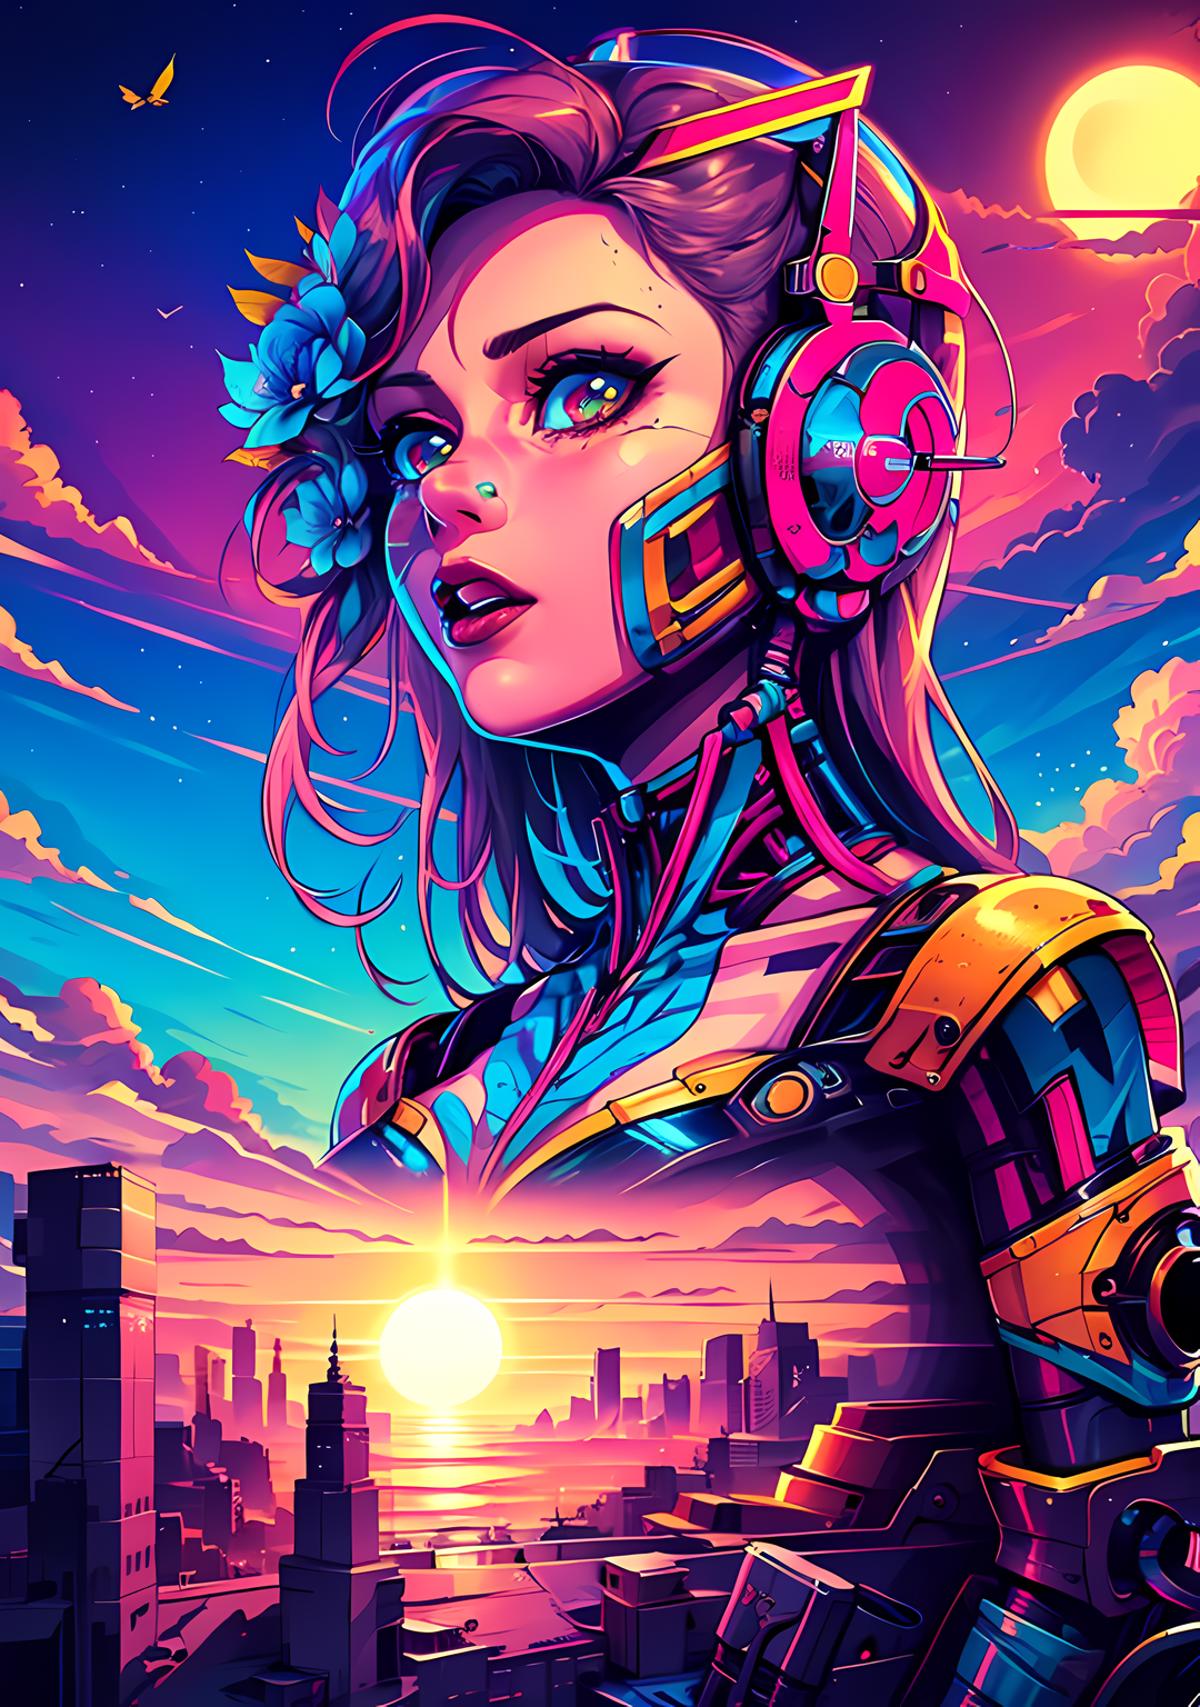 A woman wearing headphones with a sunset in the background.